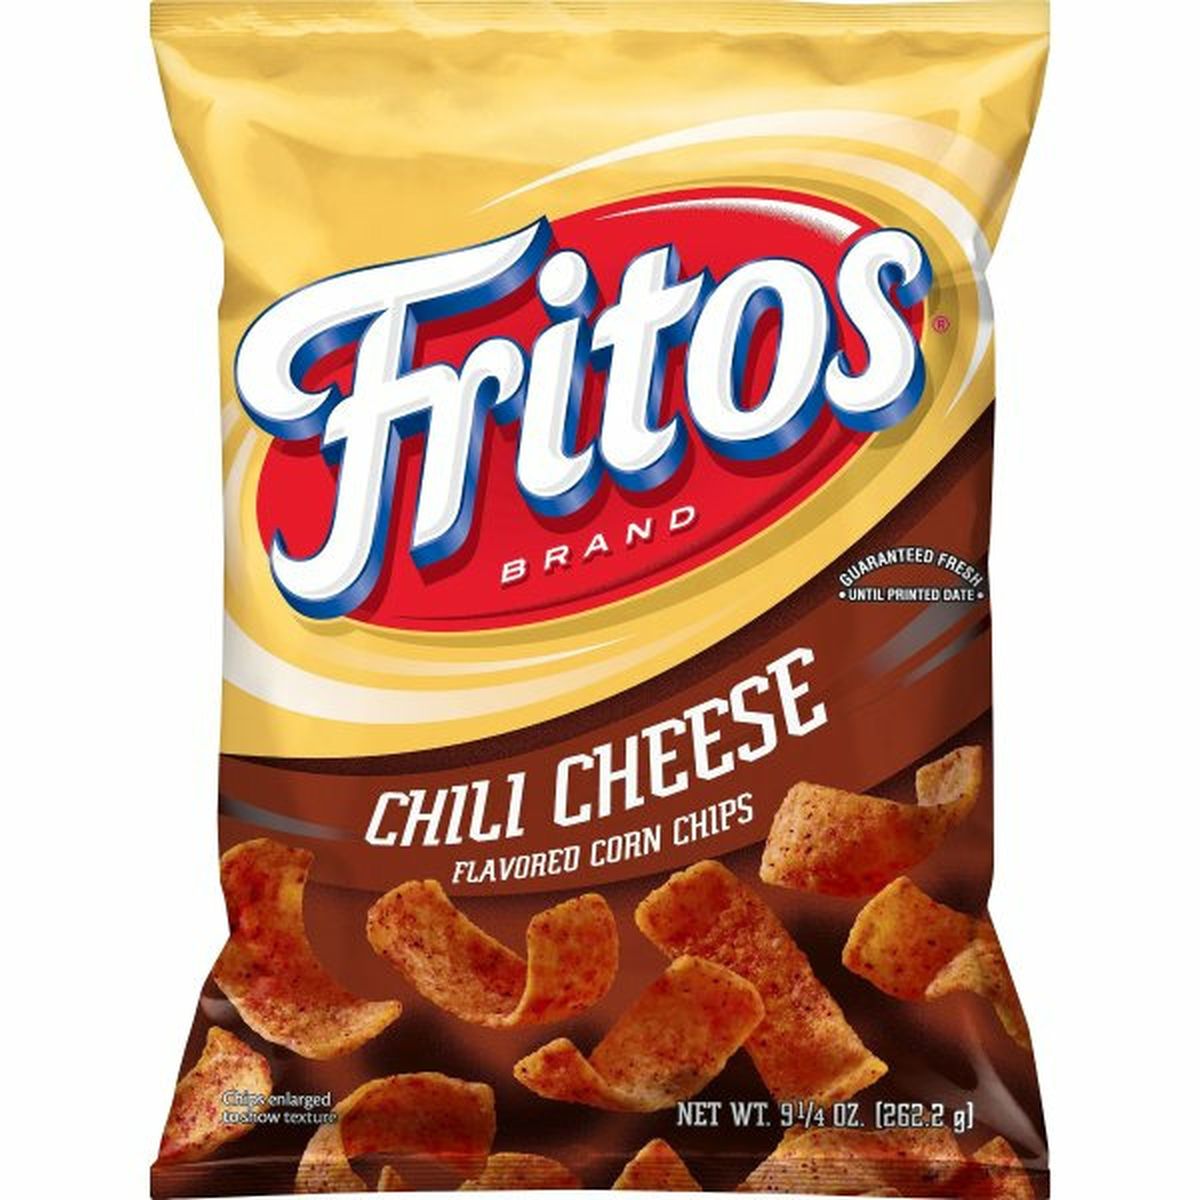 Calories in Fritos Corn Chips, Chili Cheese Flavored